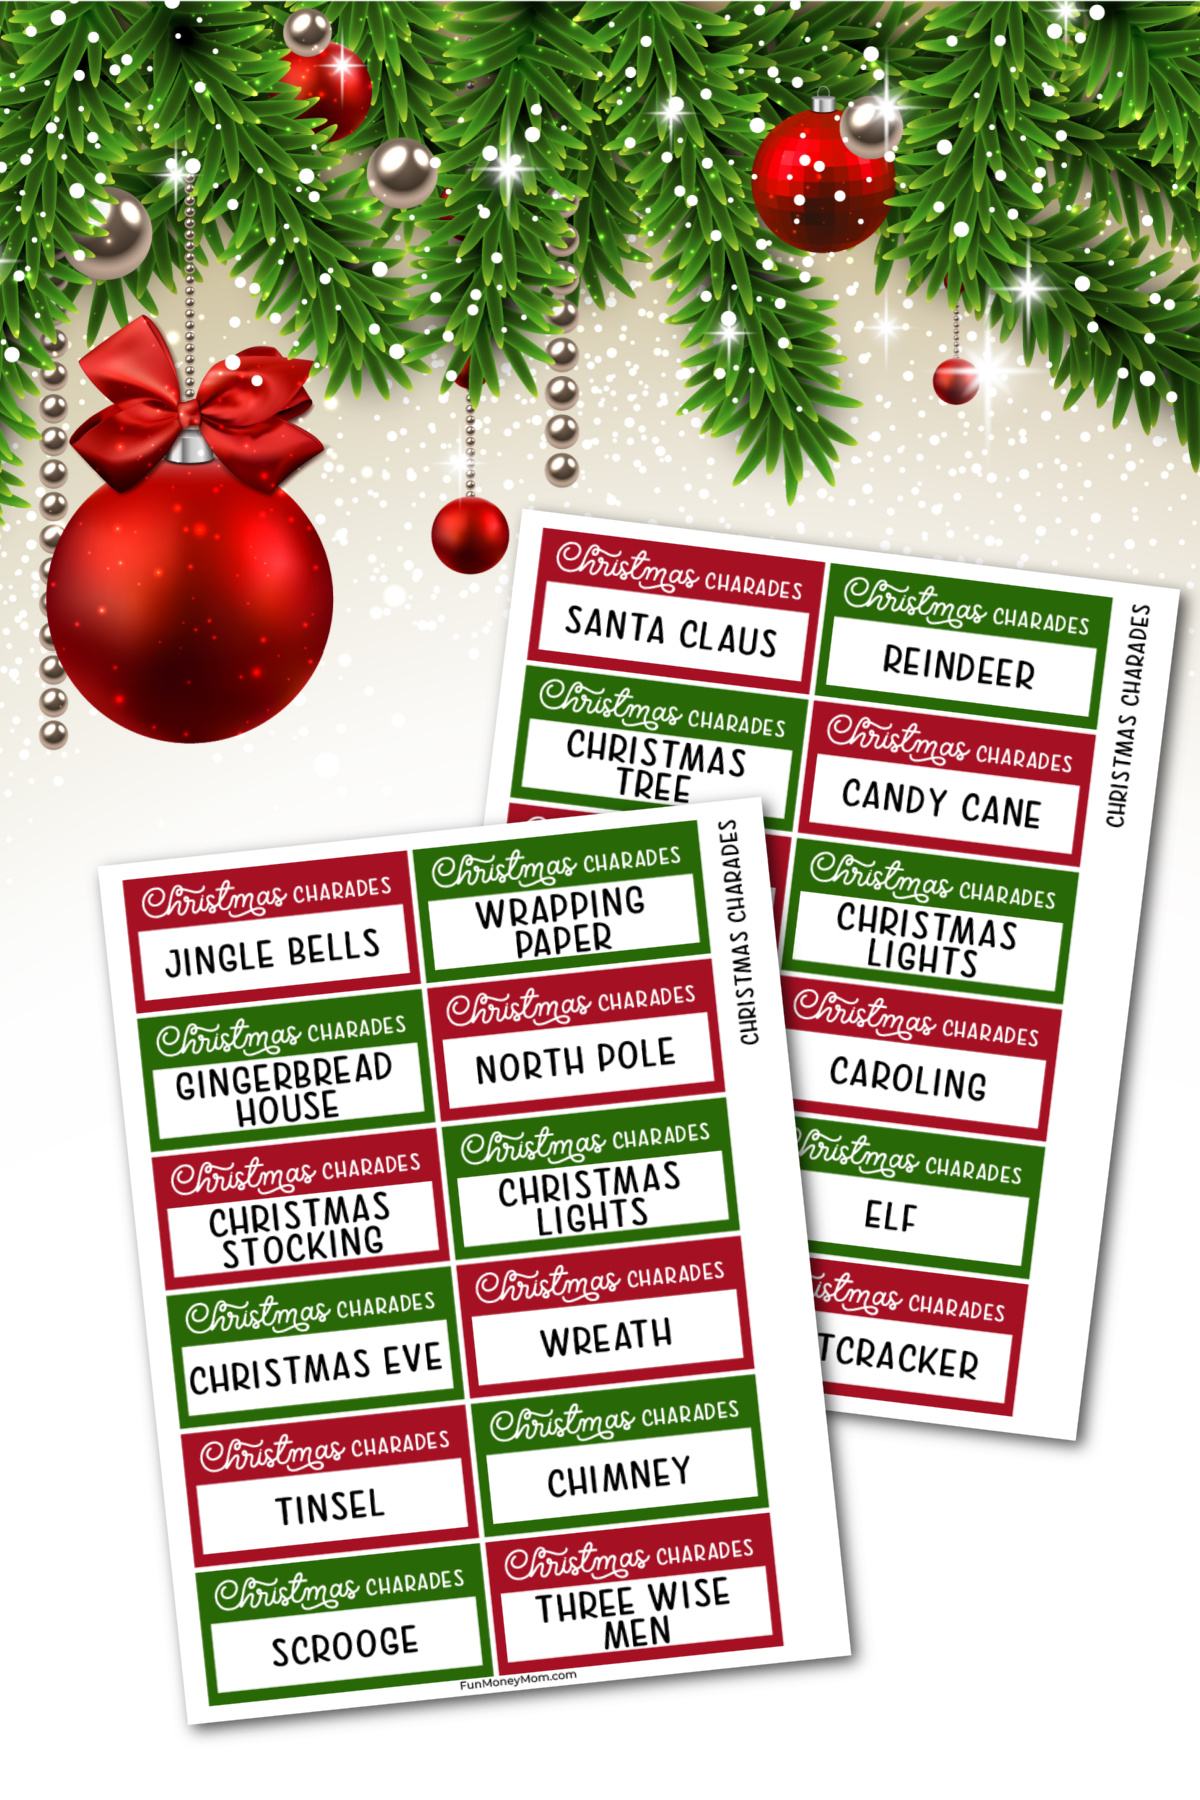 A set of christmas charades cards with a red and green background.